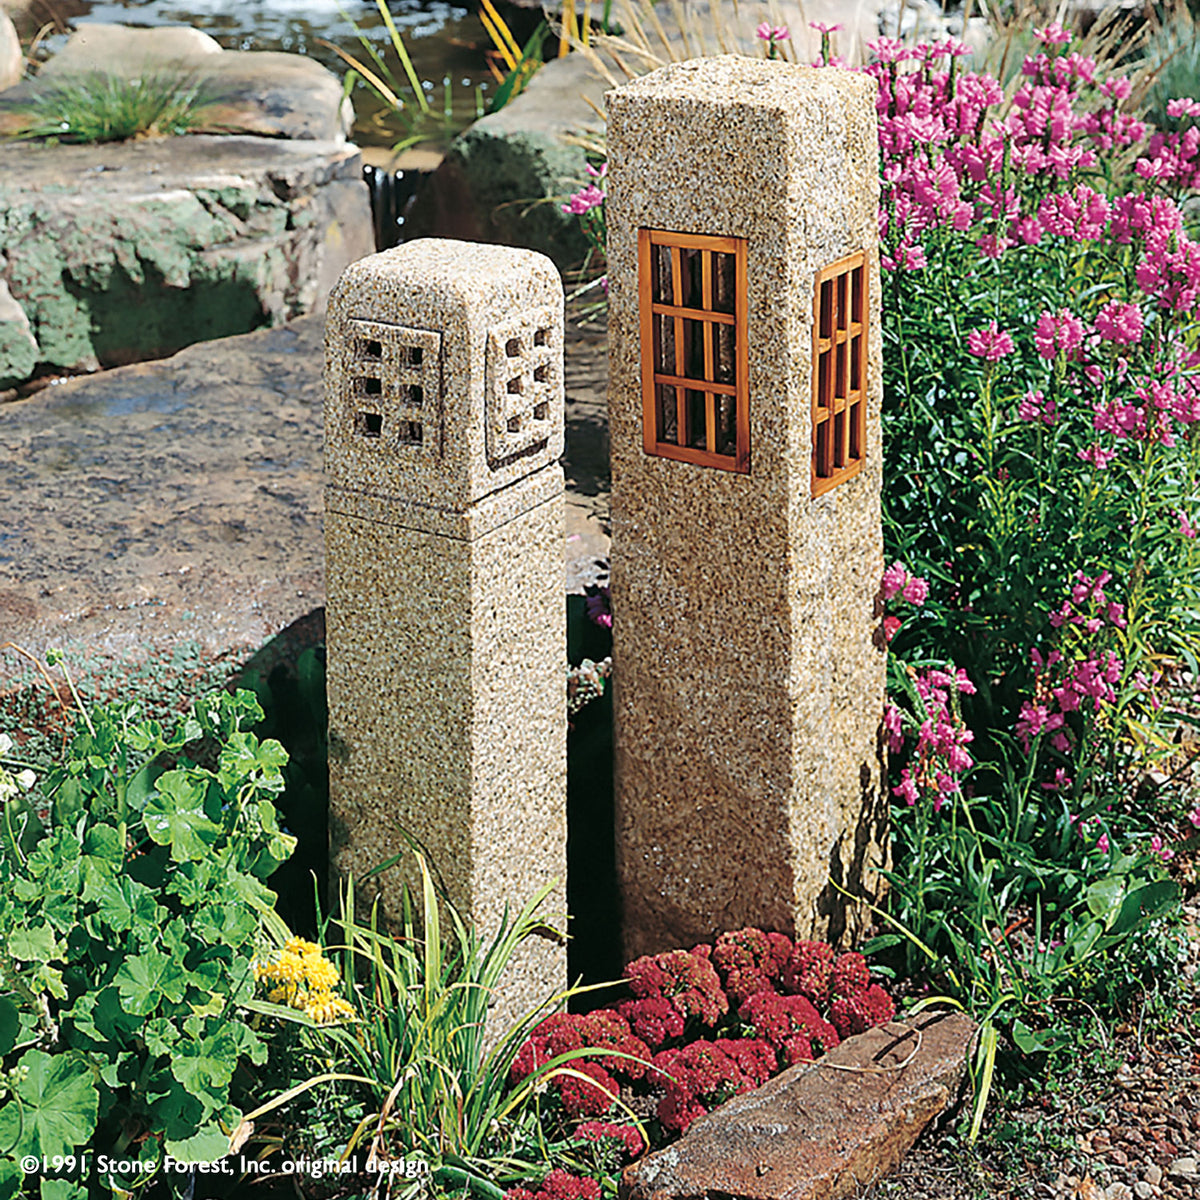 Stone Forest Rough Post Lanterns are carved out of beige granite with a rough chiseled finish, accented by wood windows.   Post Lanterns are carved out of beige granite with a bush-hammered finish, accented by stone windows image 2 of 2